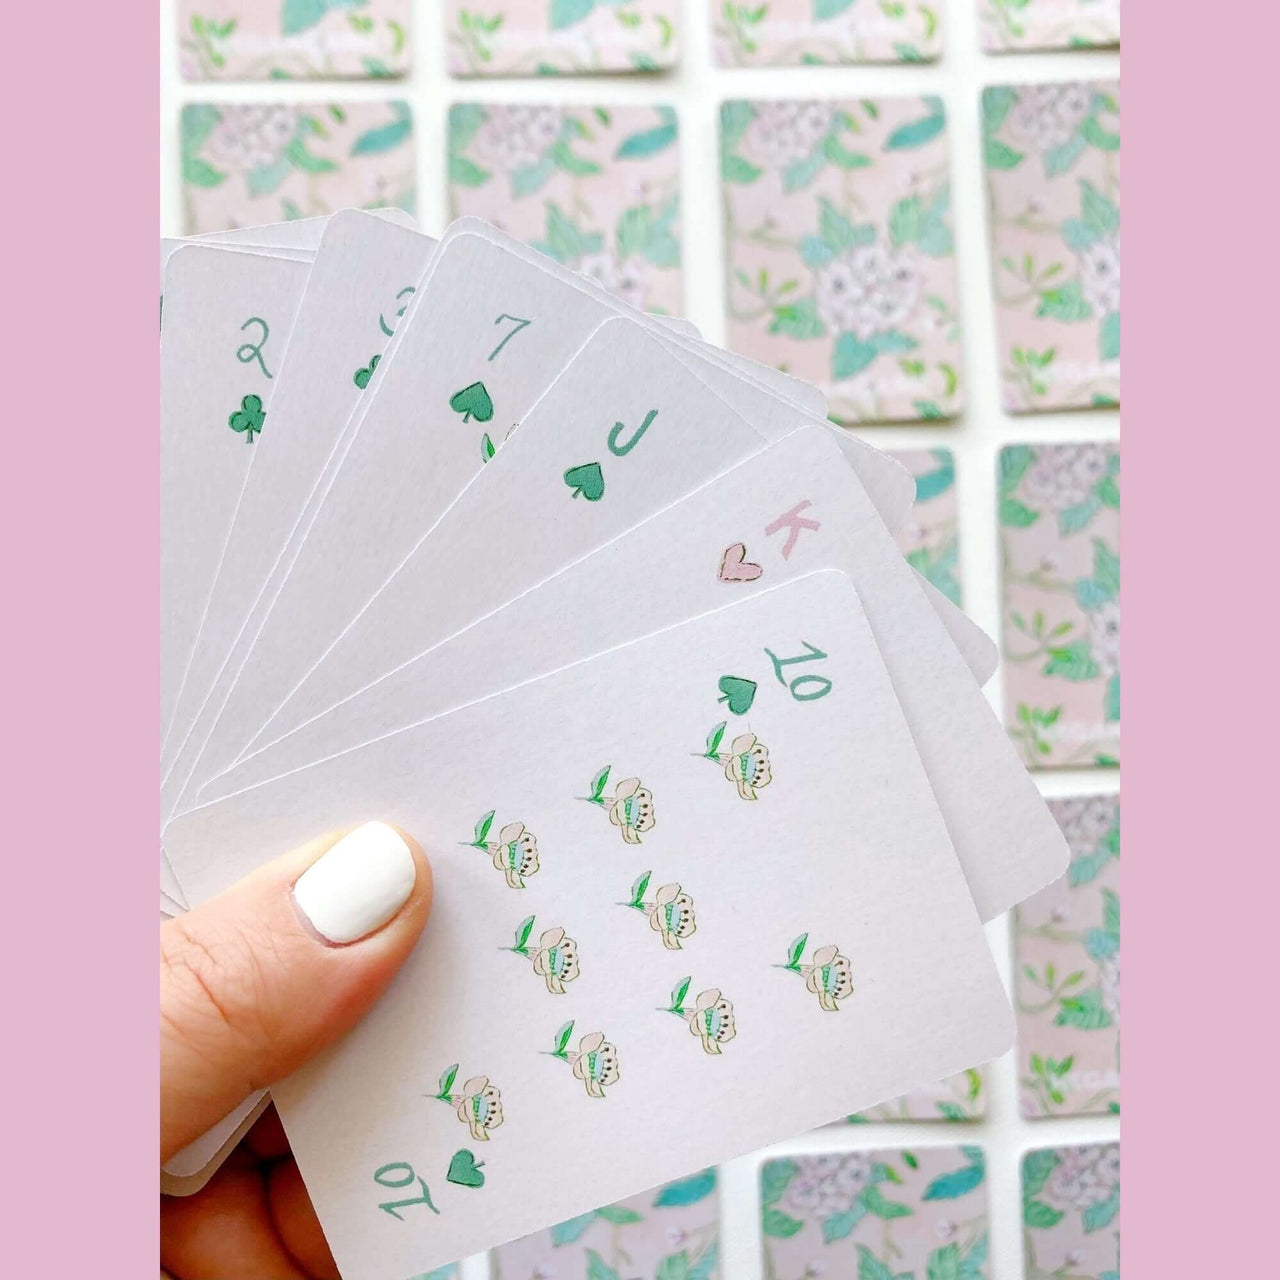 Vintage Inspired Floral Poker Deck Playing Cards